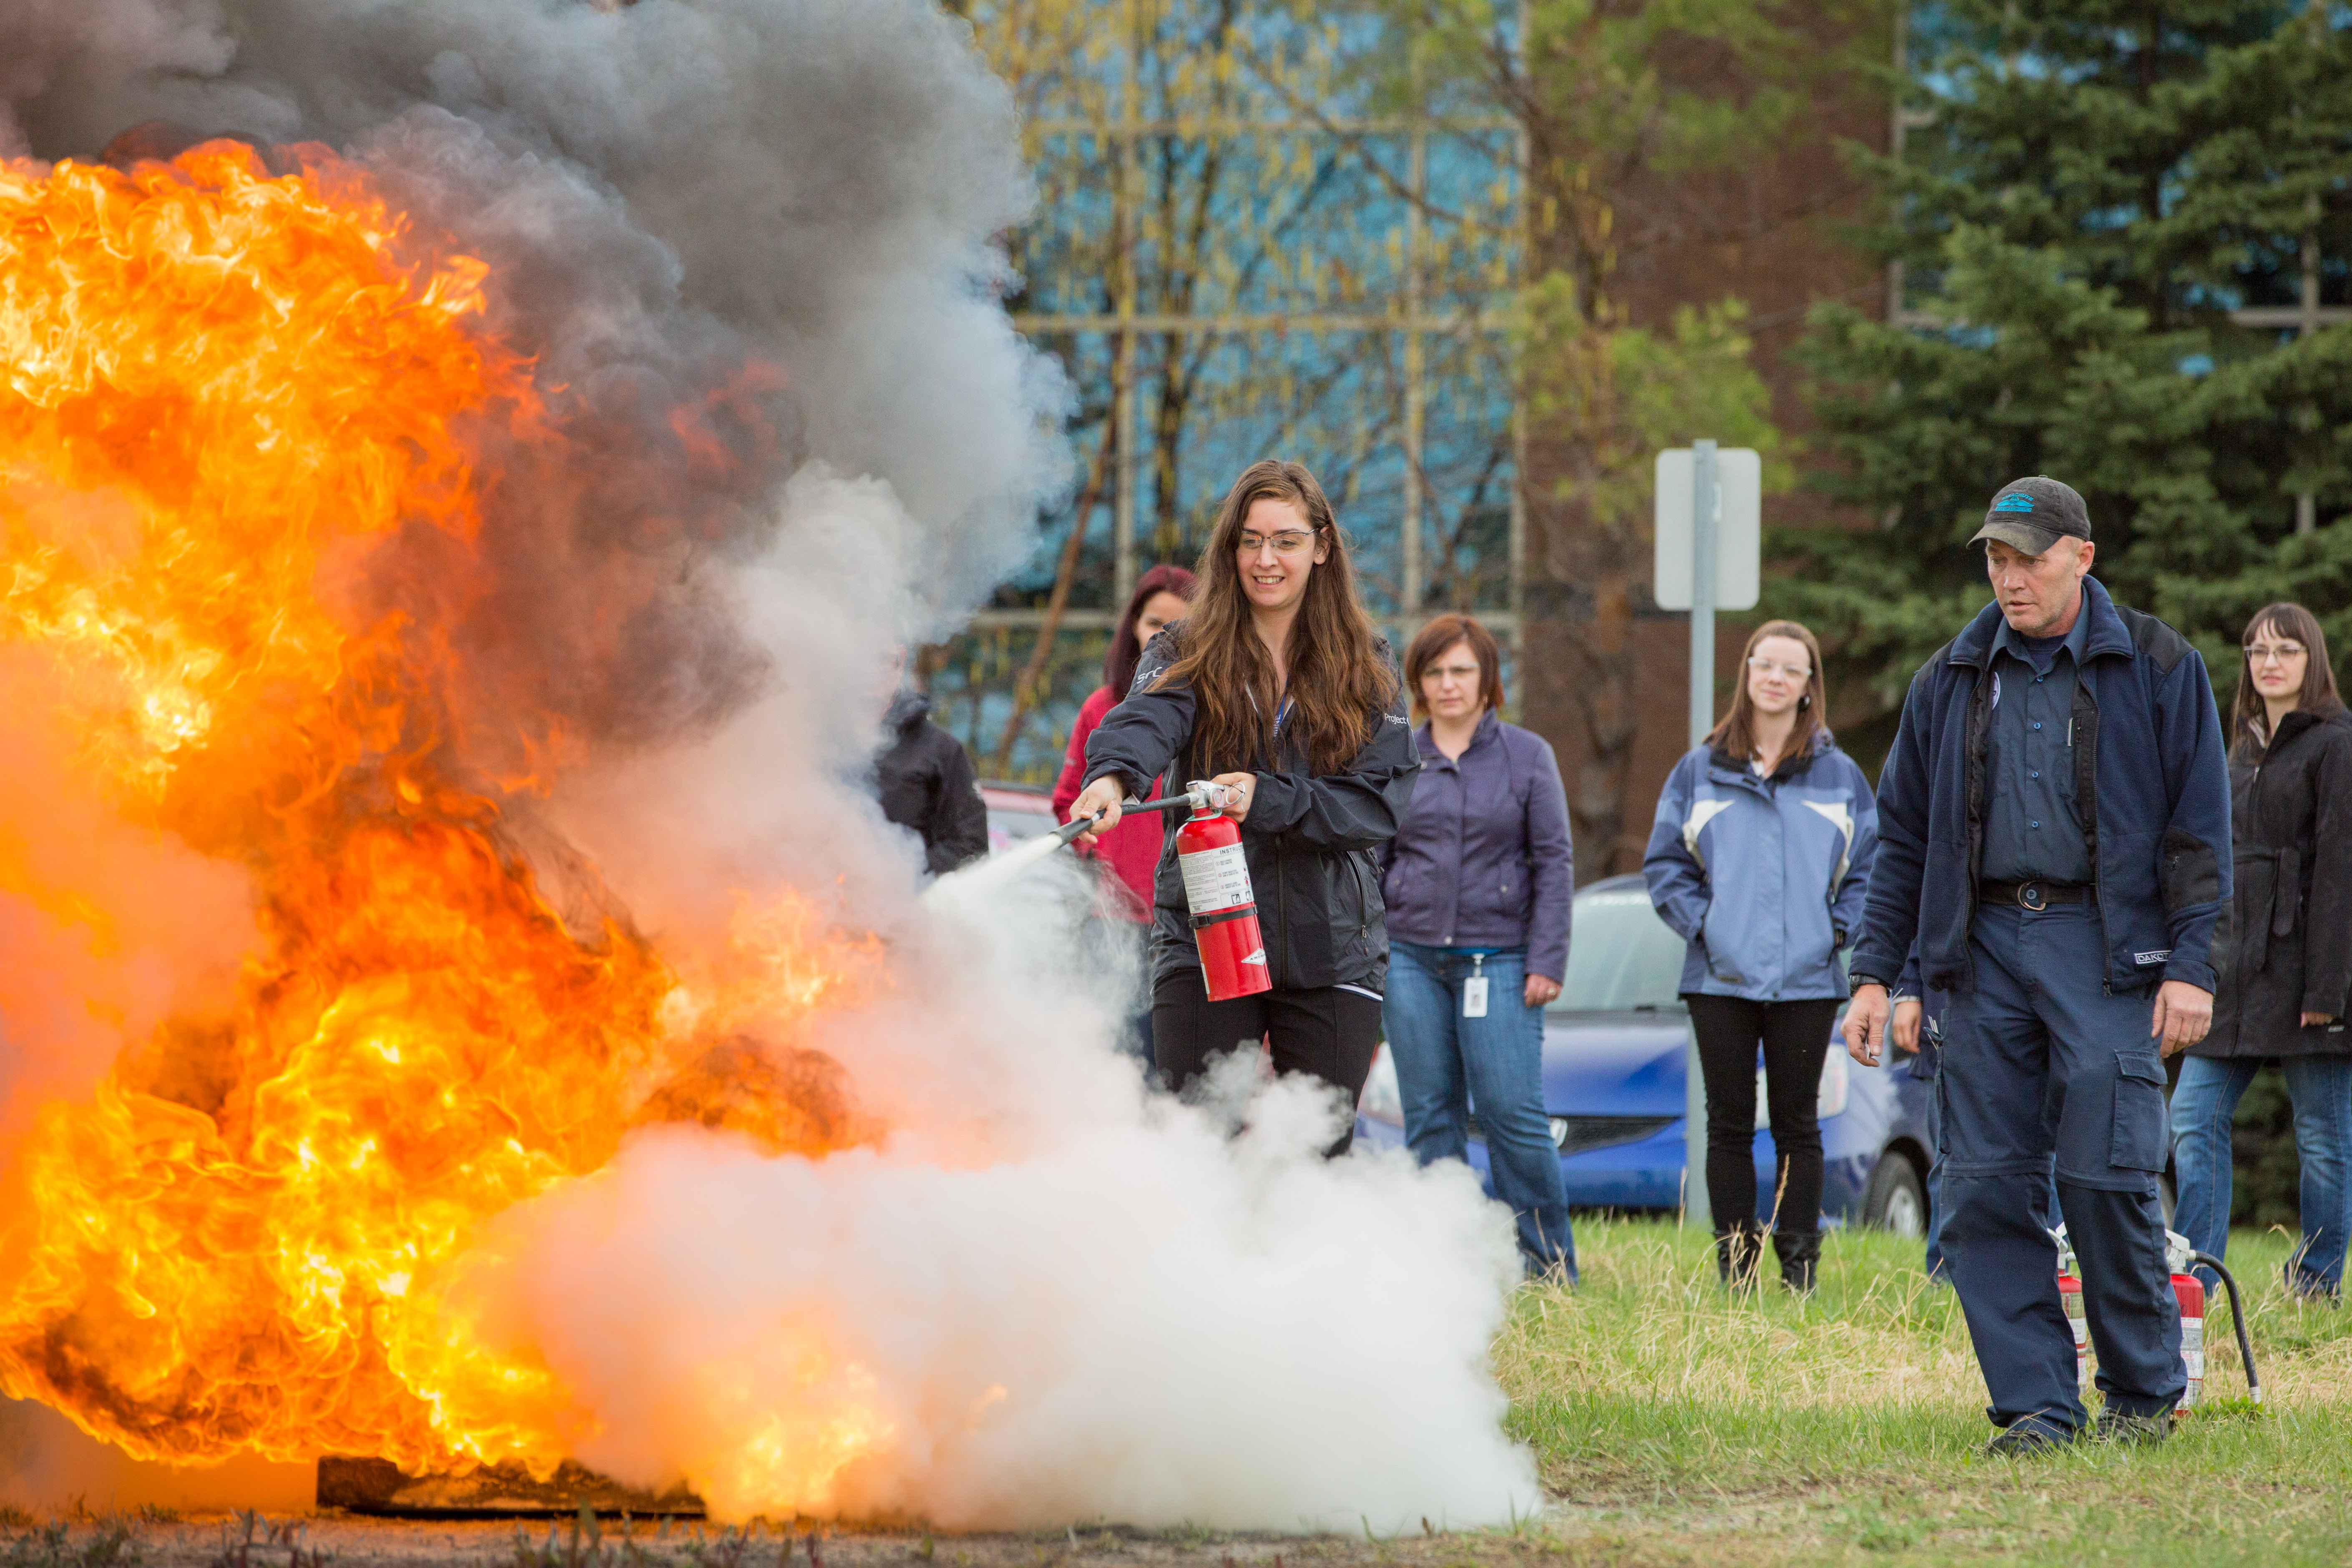 Woman extinguishes fire during fire extinguisher training